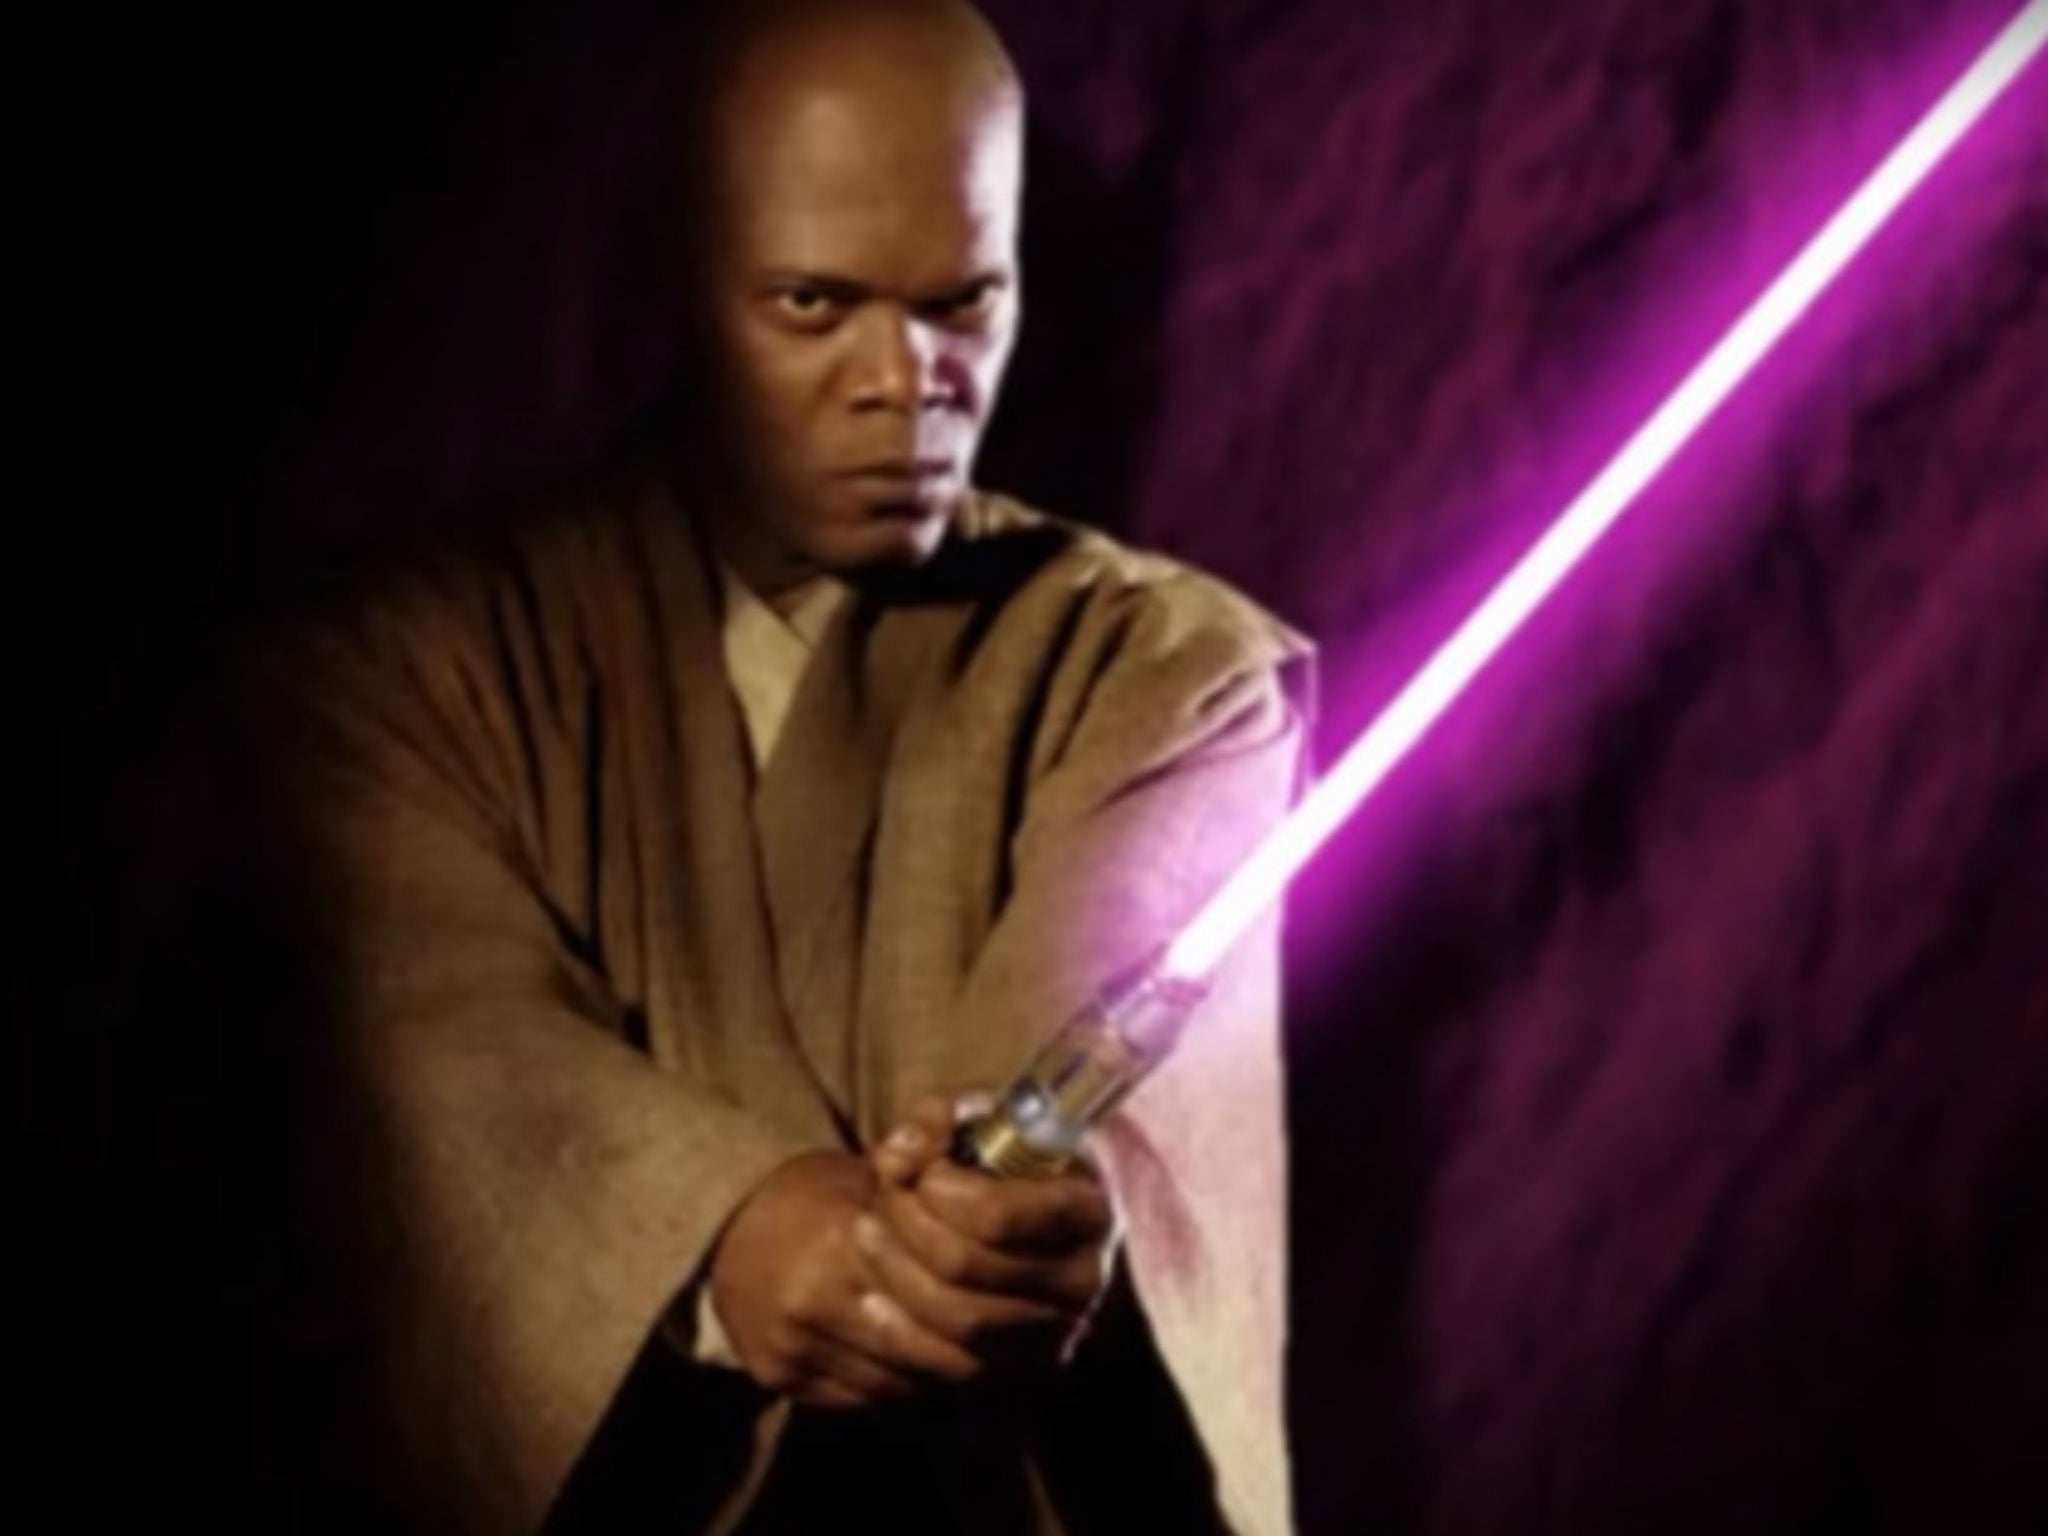 Samuel L Jackson personally requested a purple lightsaber from George Lucas